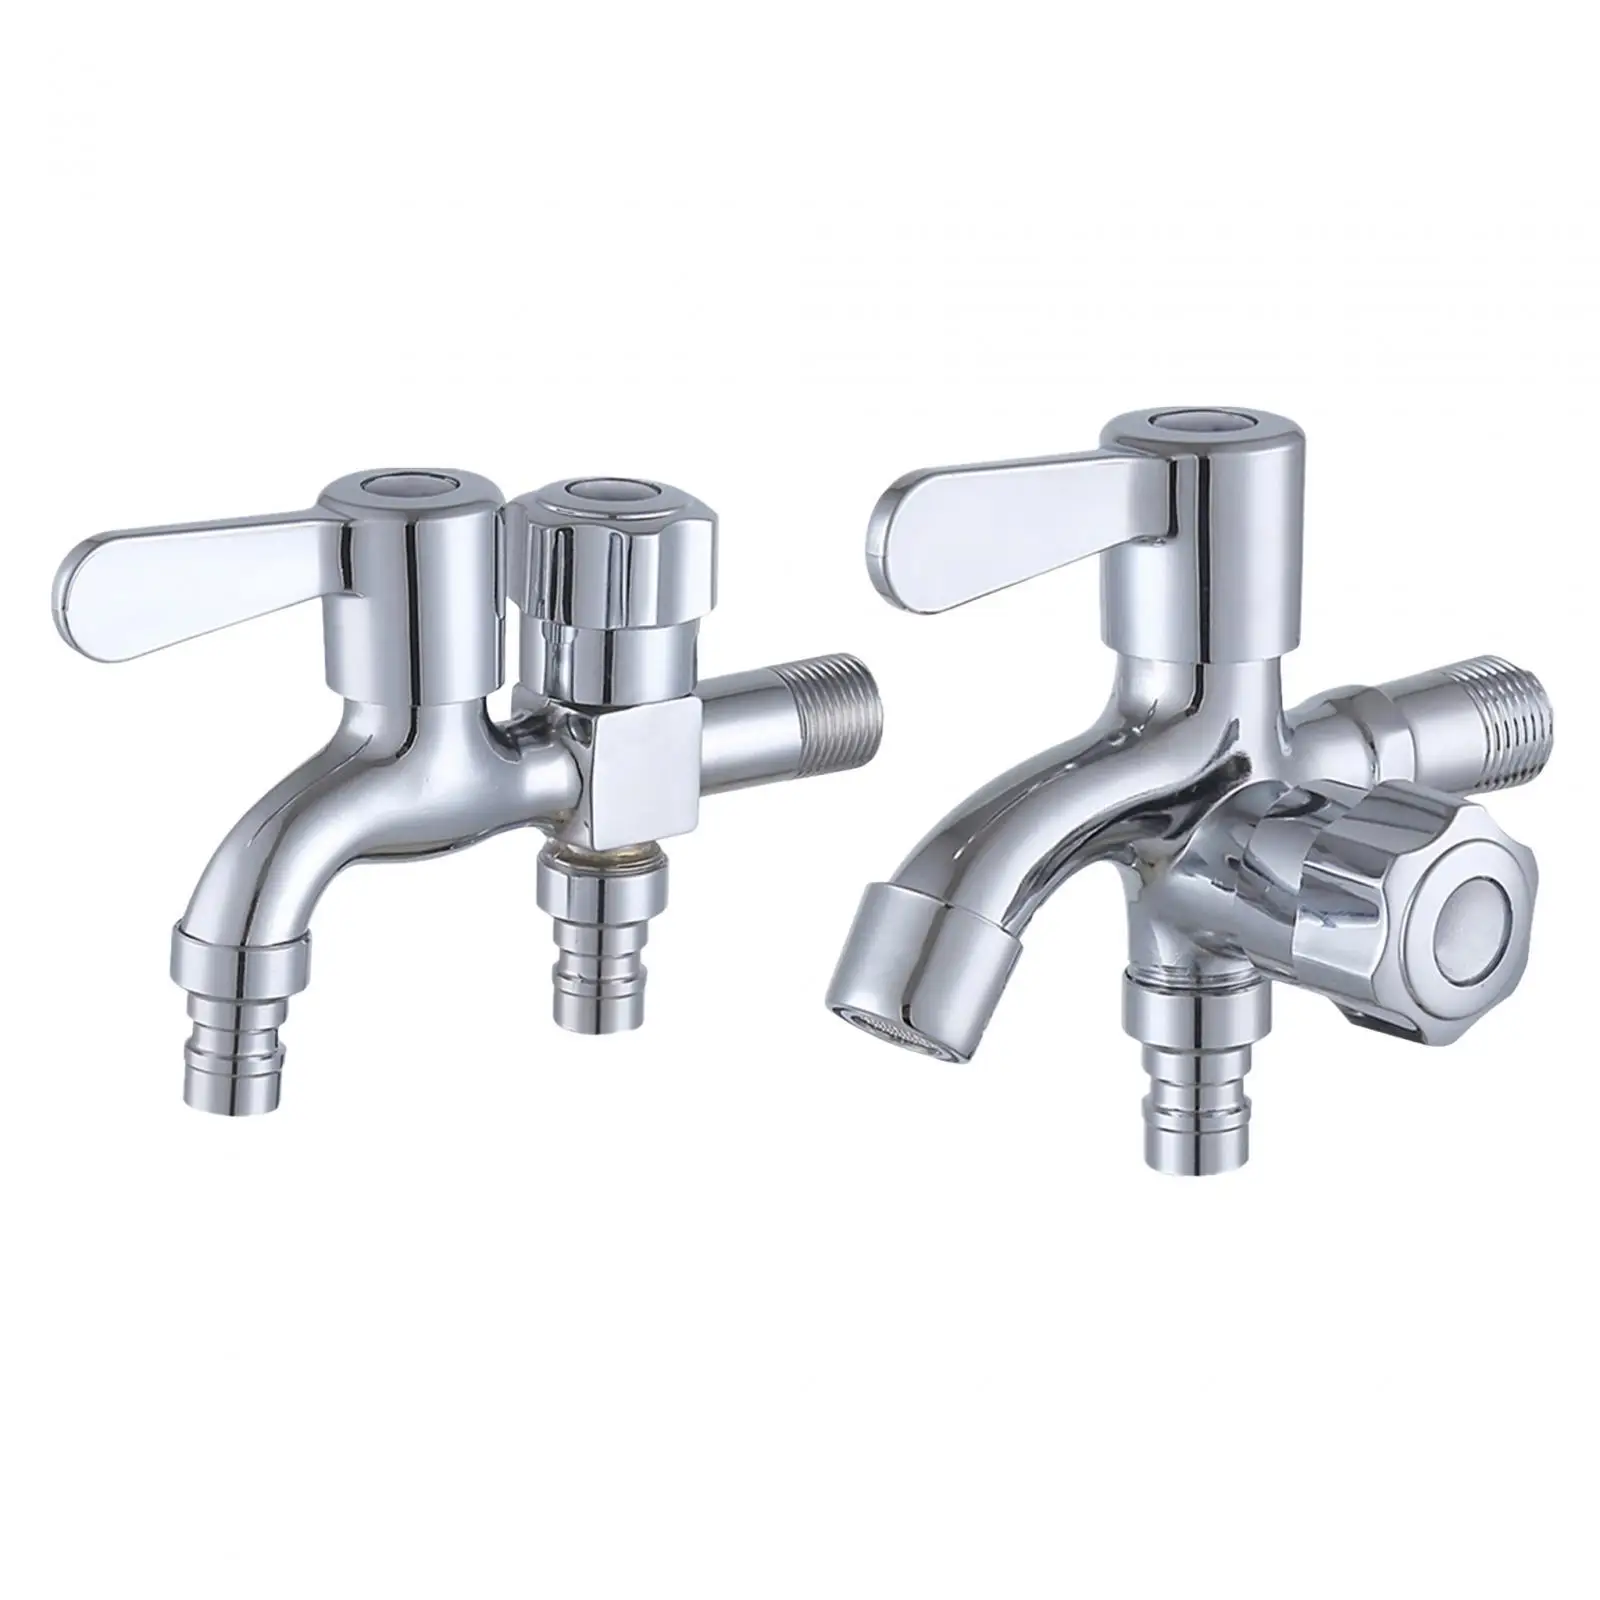 Washing Machine Water Faucet Sink tap Double Outlet Faucet Mop Pool Faucet for Laundry Room Kitchen Sink Garden